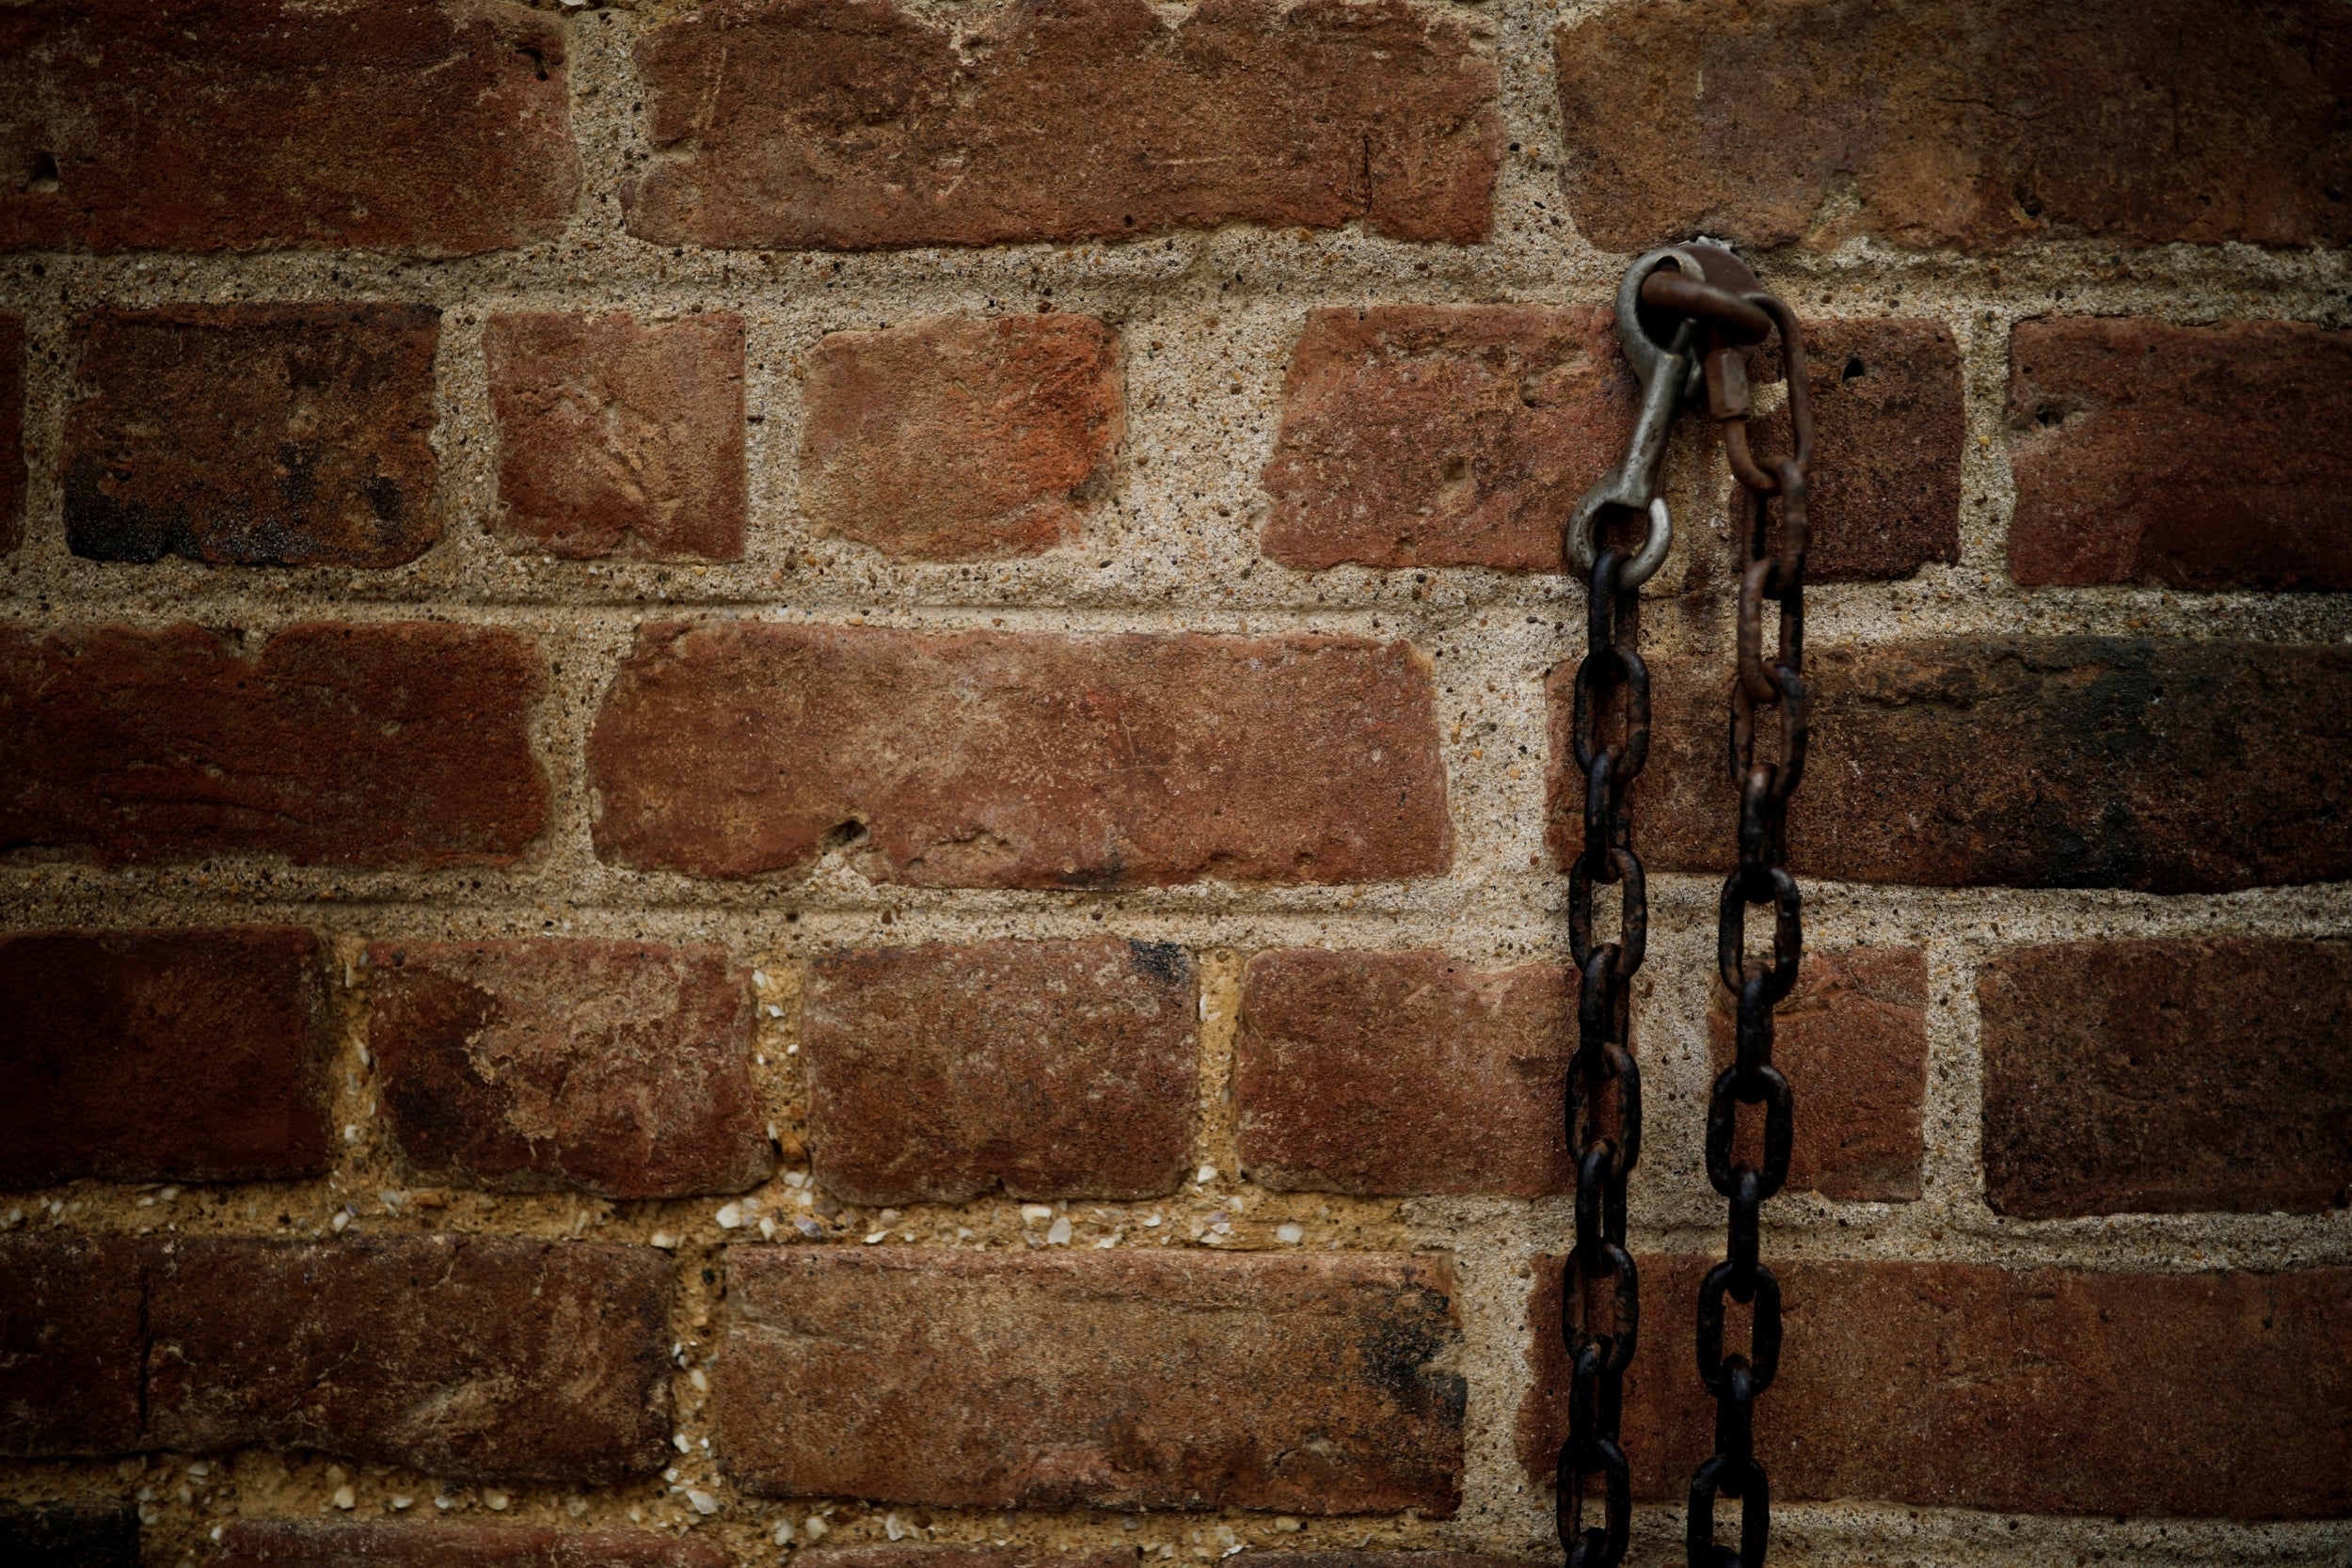 Chains and a lock attached to a wall at Mount Vernon estate, home to George Washington, first president of the United States and a slave owner